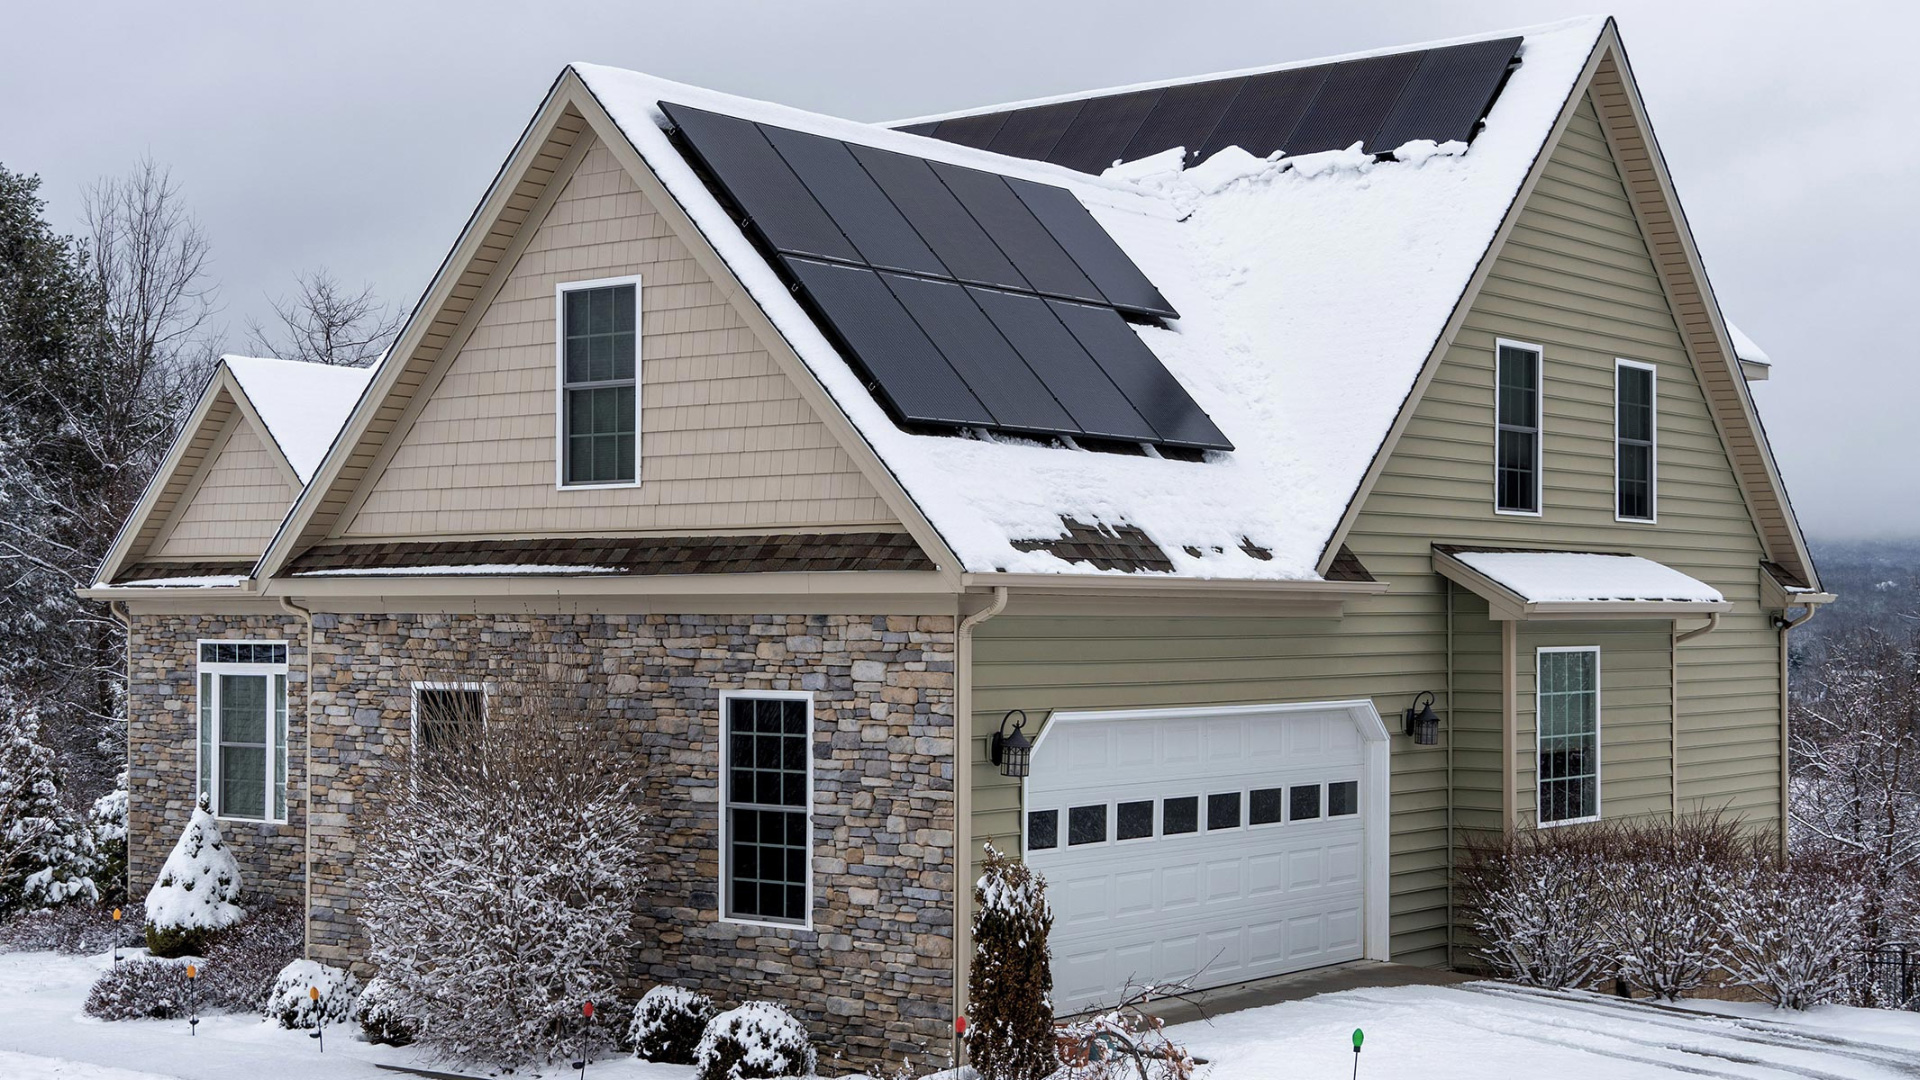 Should You Install Solar Panels During Winter?